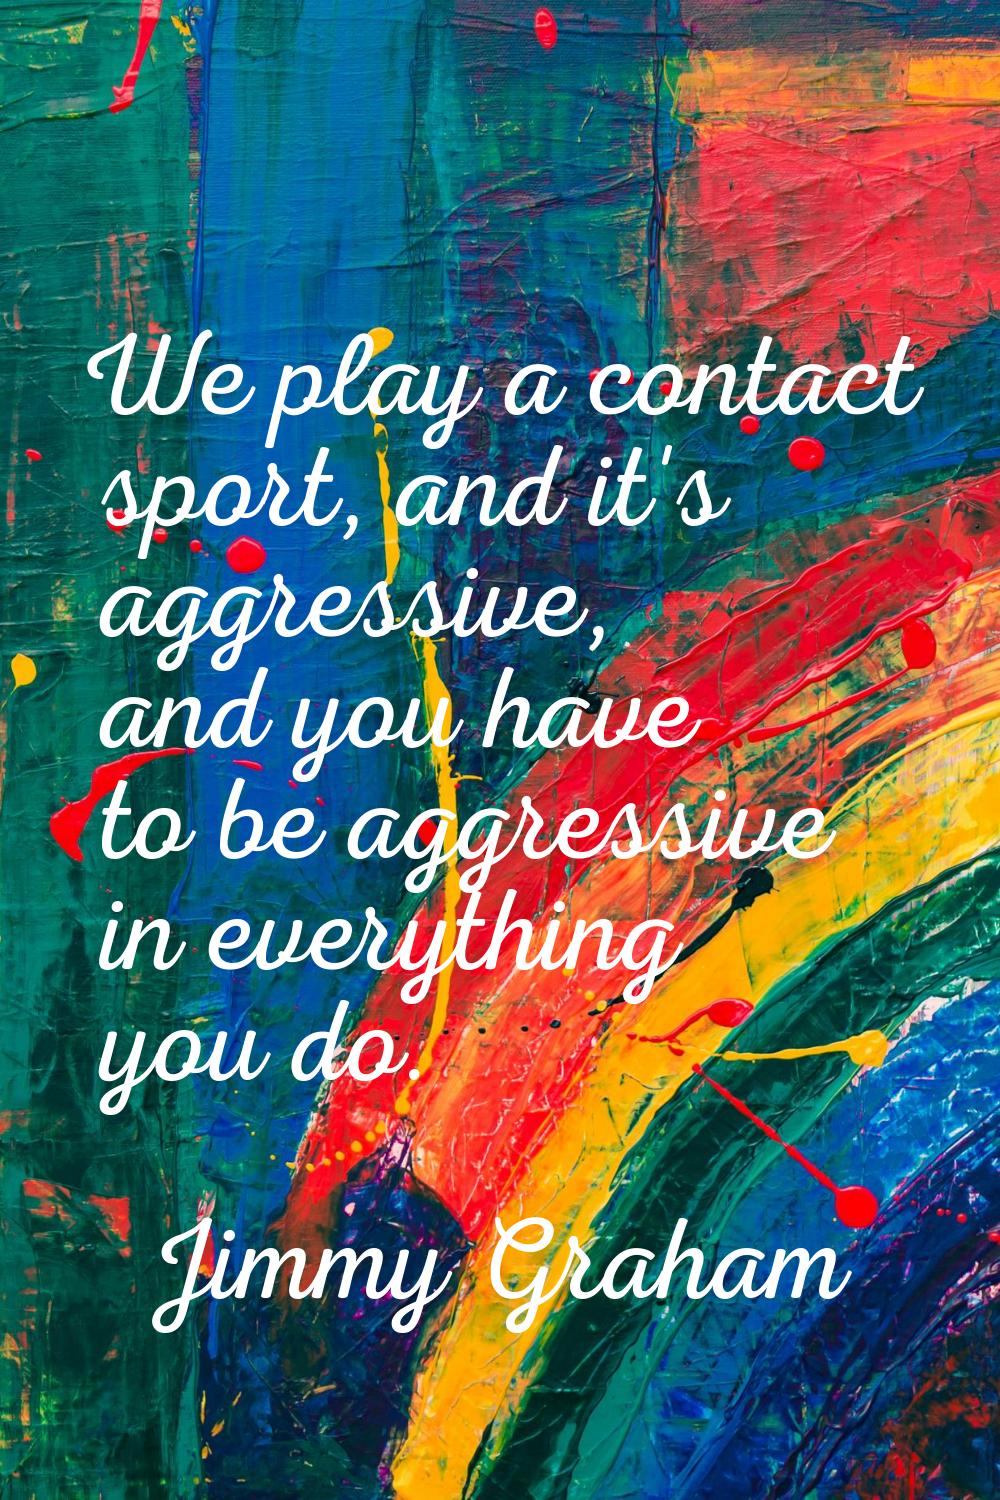 We play a contact sport, and it's aggressive, and you have to be aggressive in everything you do.